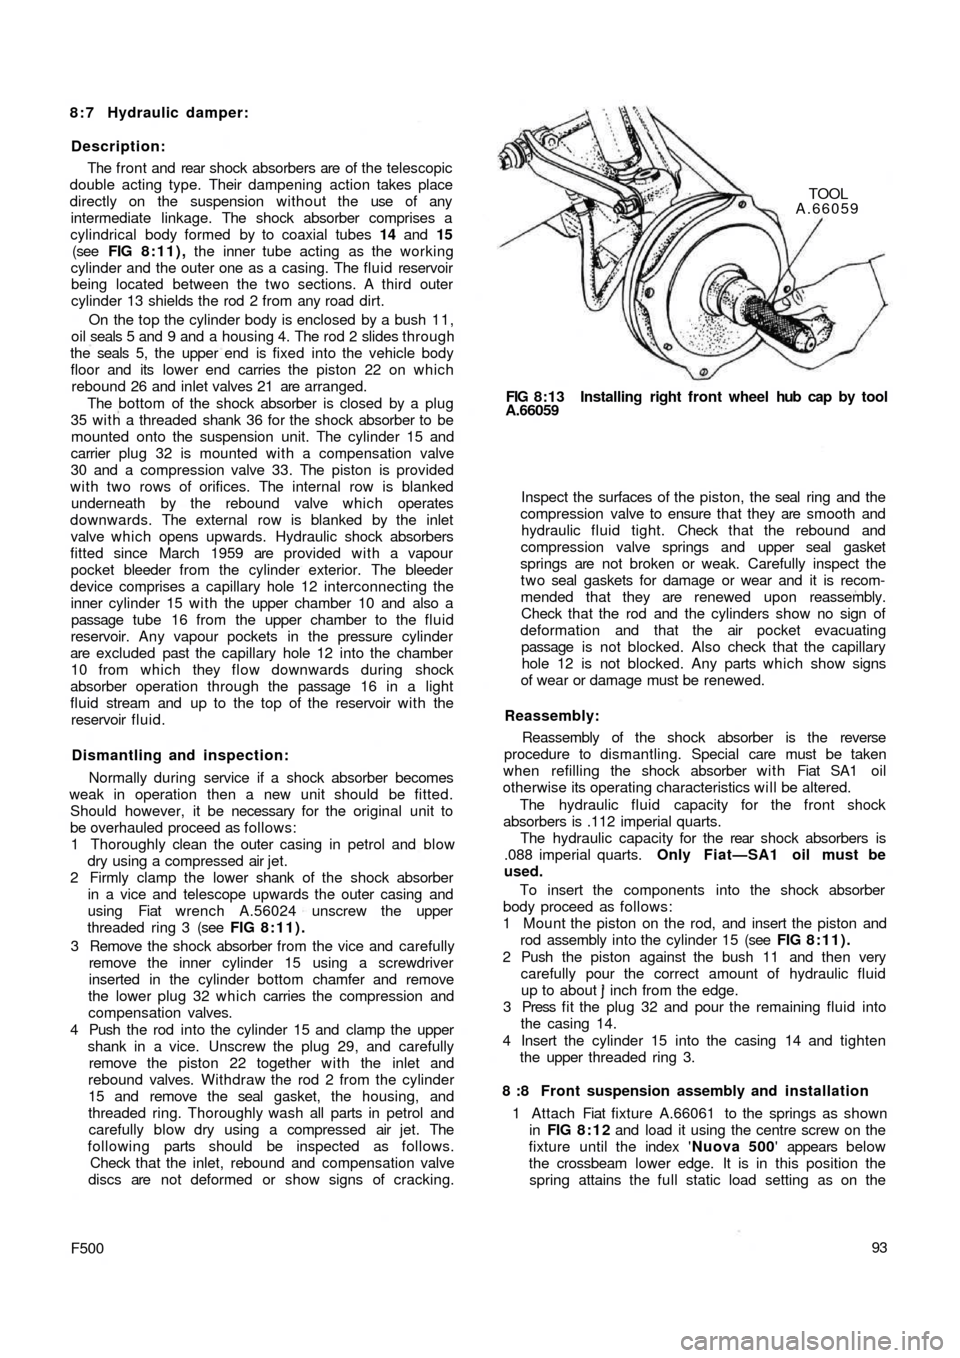 FIAT 500 1971 1.G Workshop Manual 8 : 7 Hydraulic damper:
Description:
The front and rear  shock absorbers are of the telescopic
double acting type. Their dampening action takes place
directly on the suspension without the use of any
